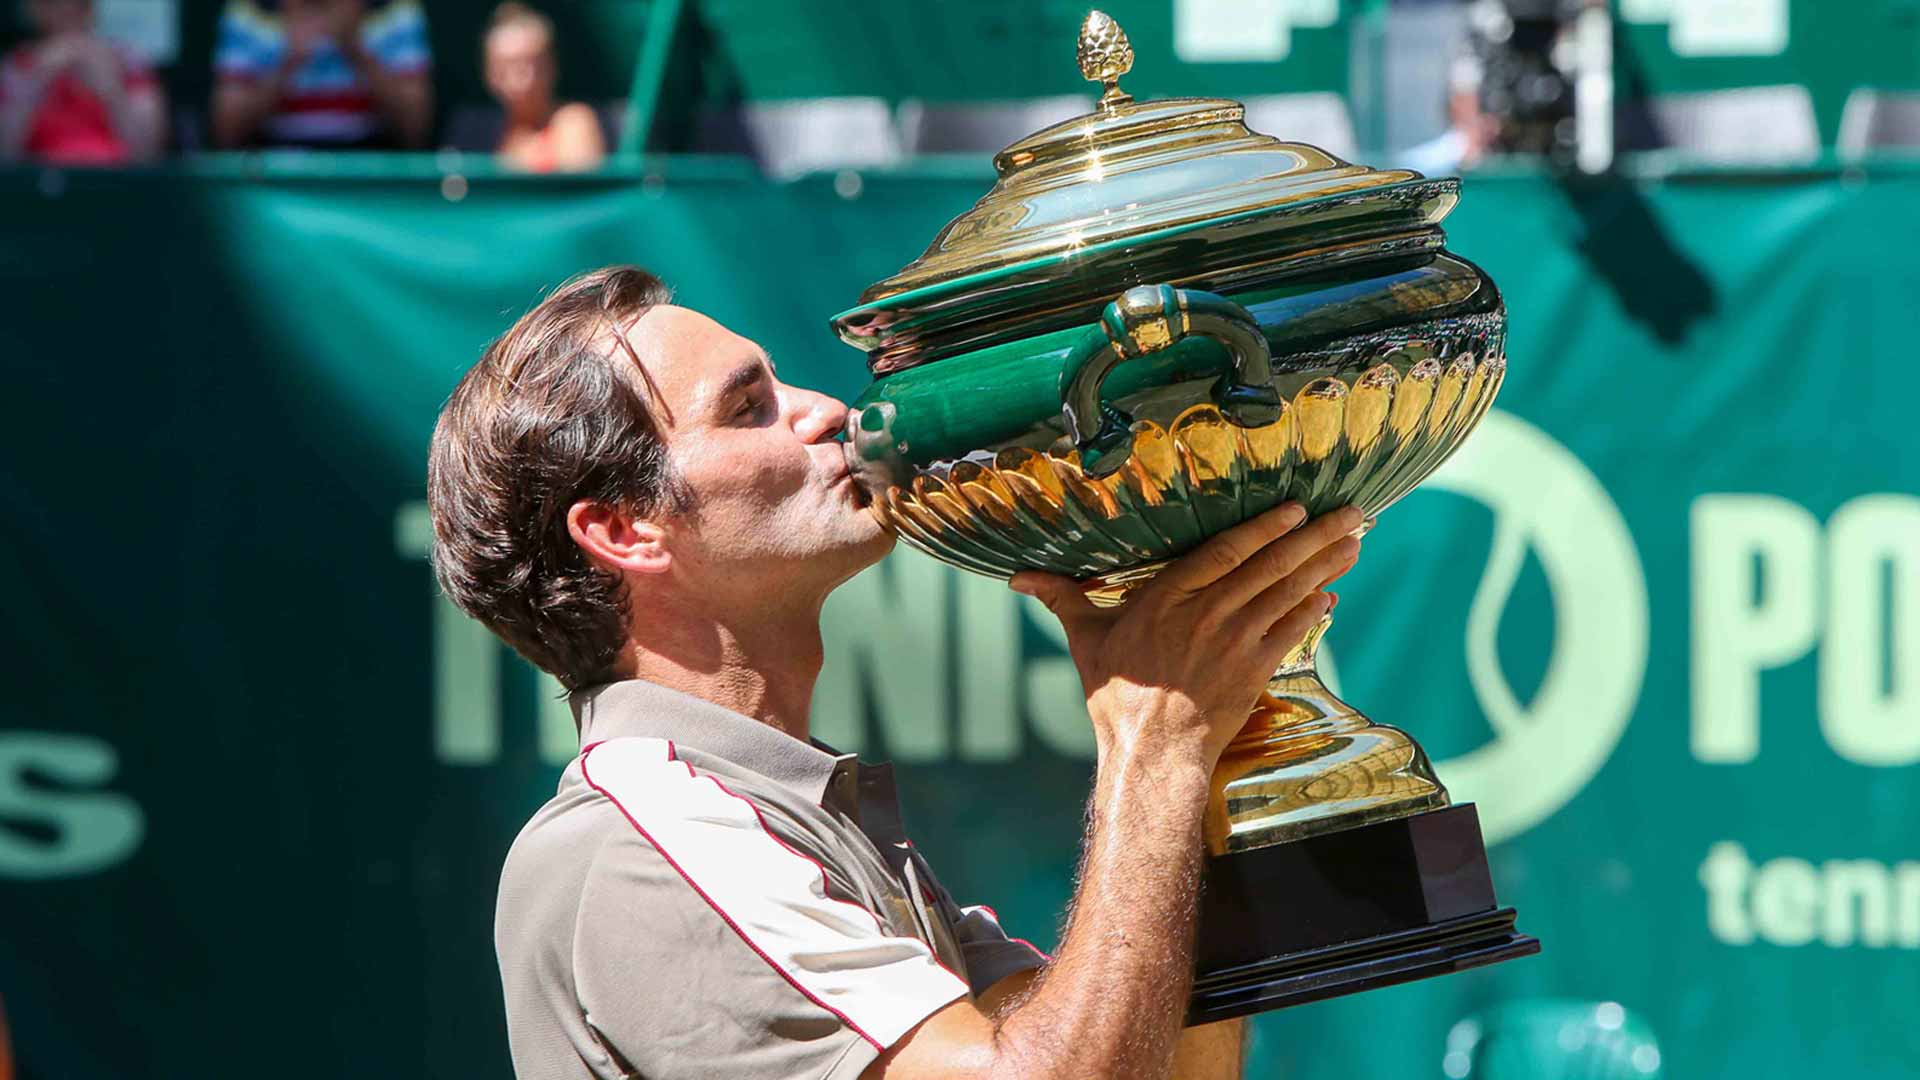 Roger Federer won a record 10 titles in Halle, Germany.